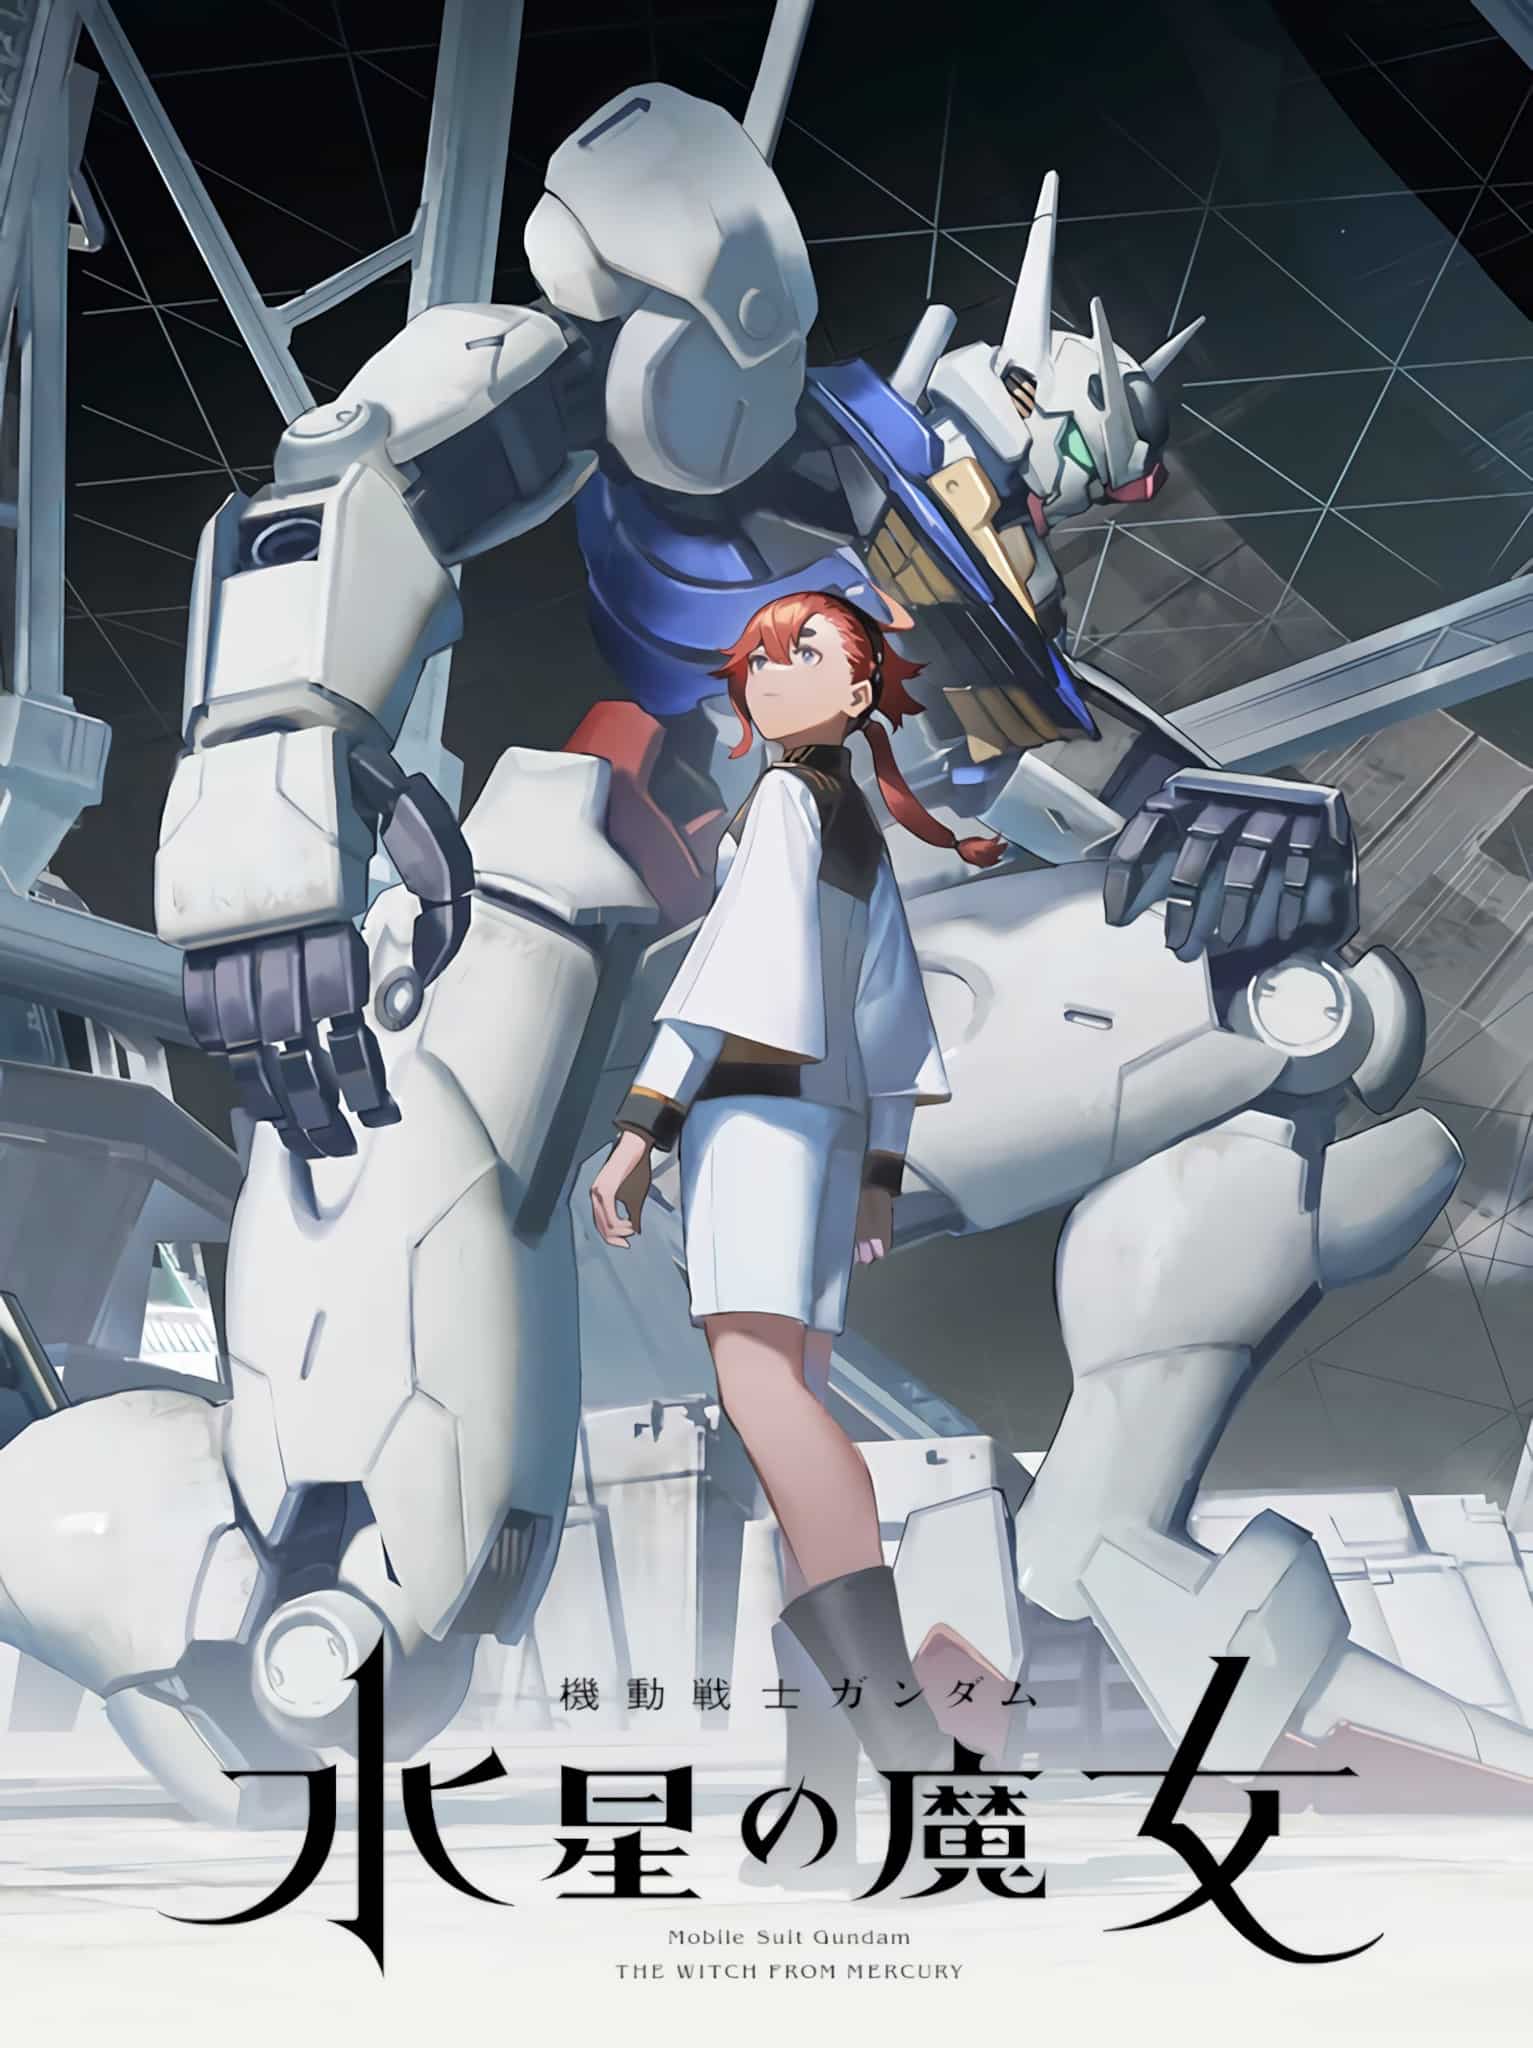 Second visuel pour lanime Mobile Suit Gundam : The Witch from Mercury